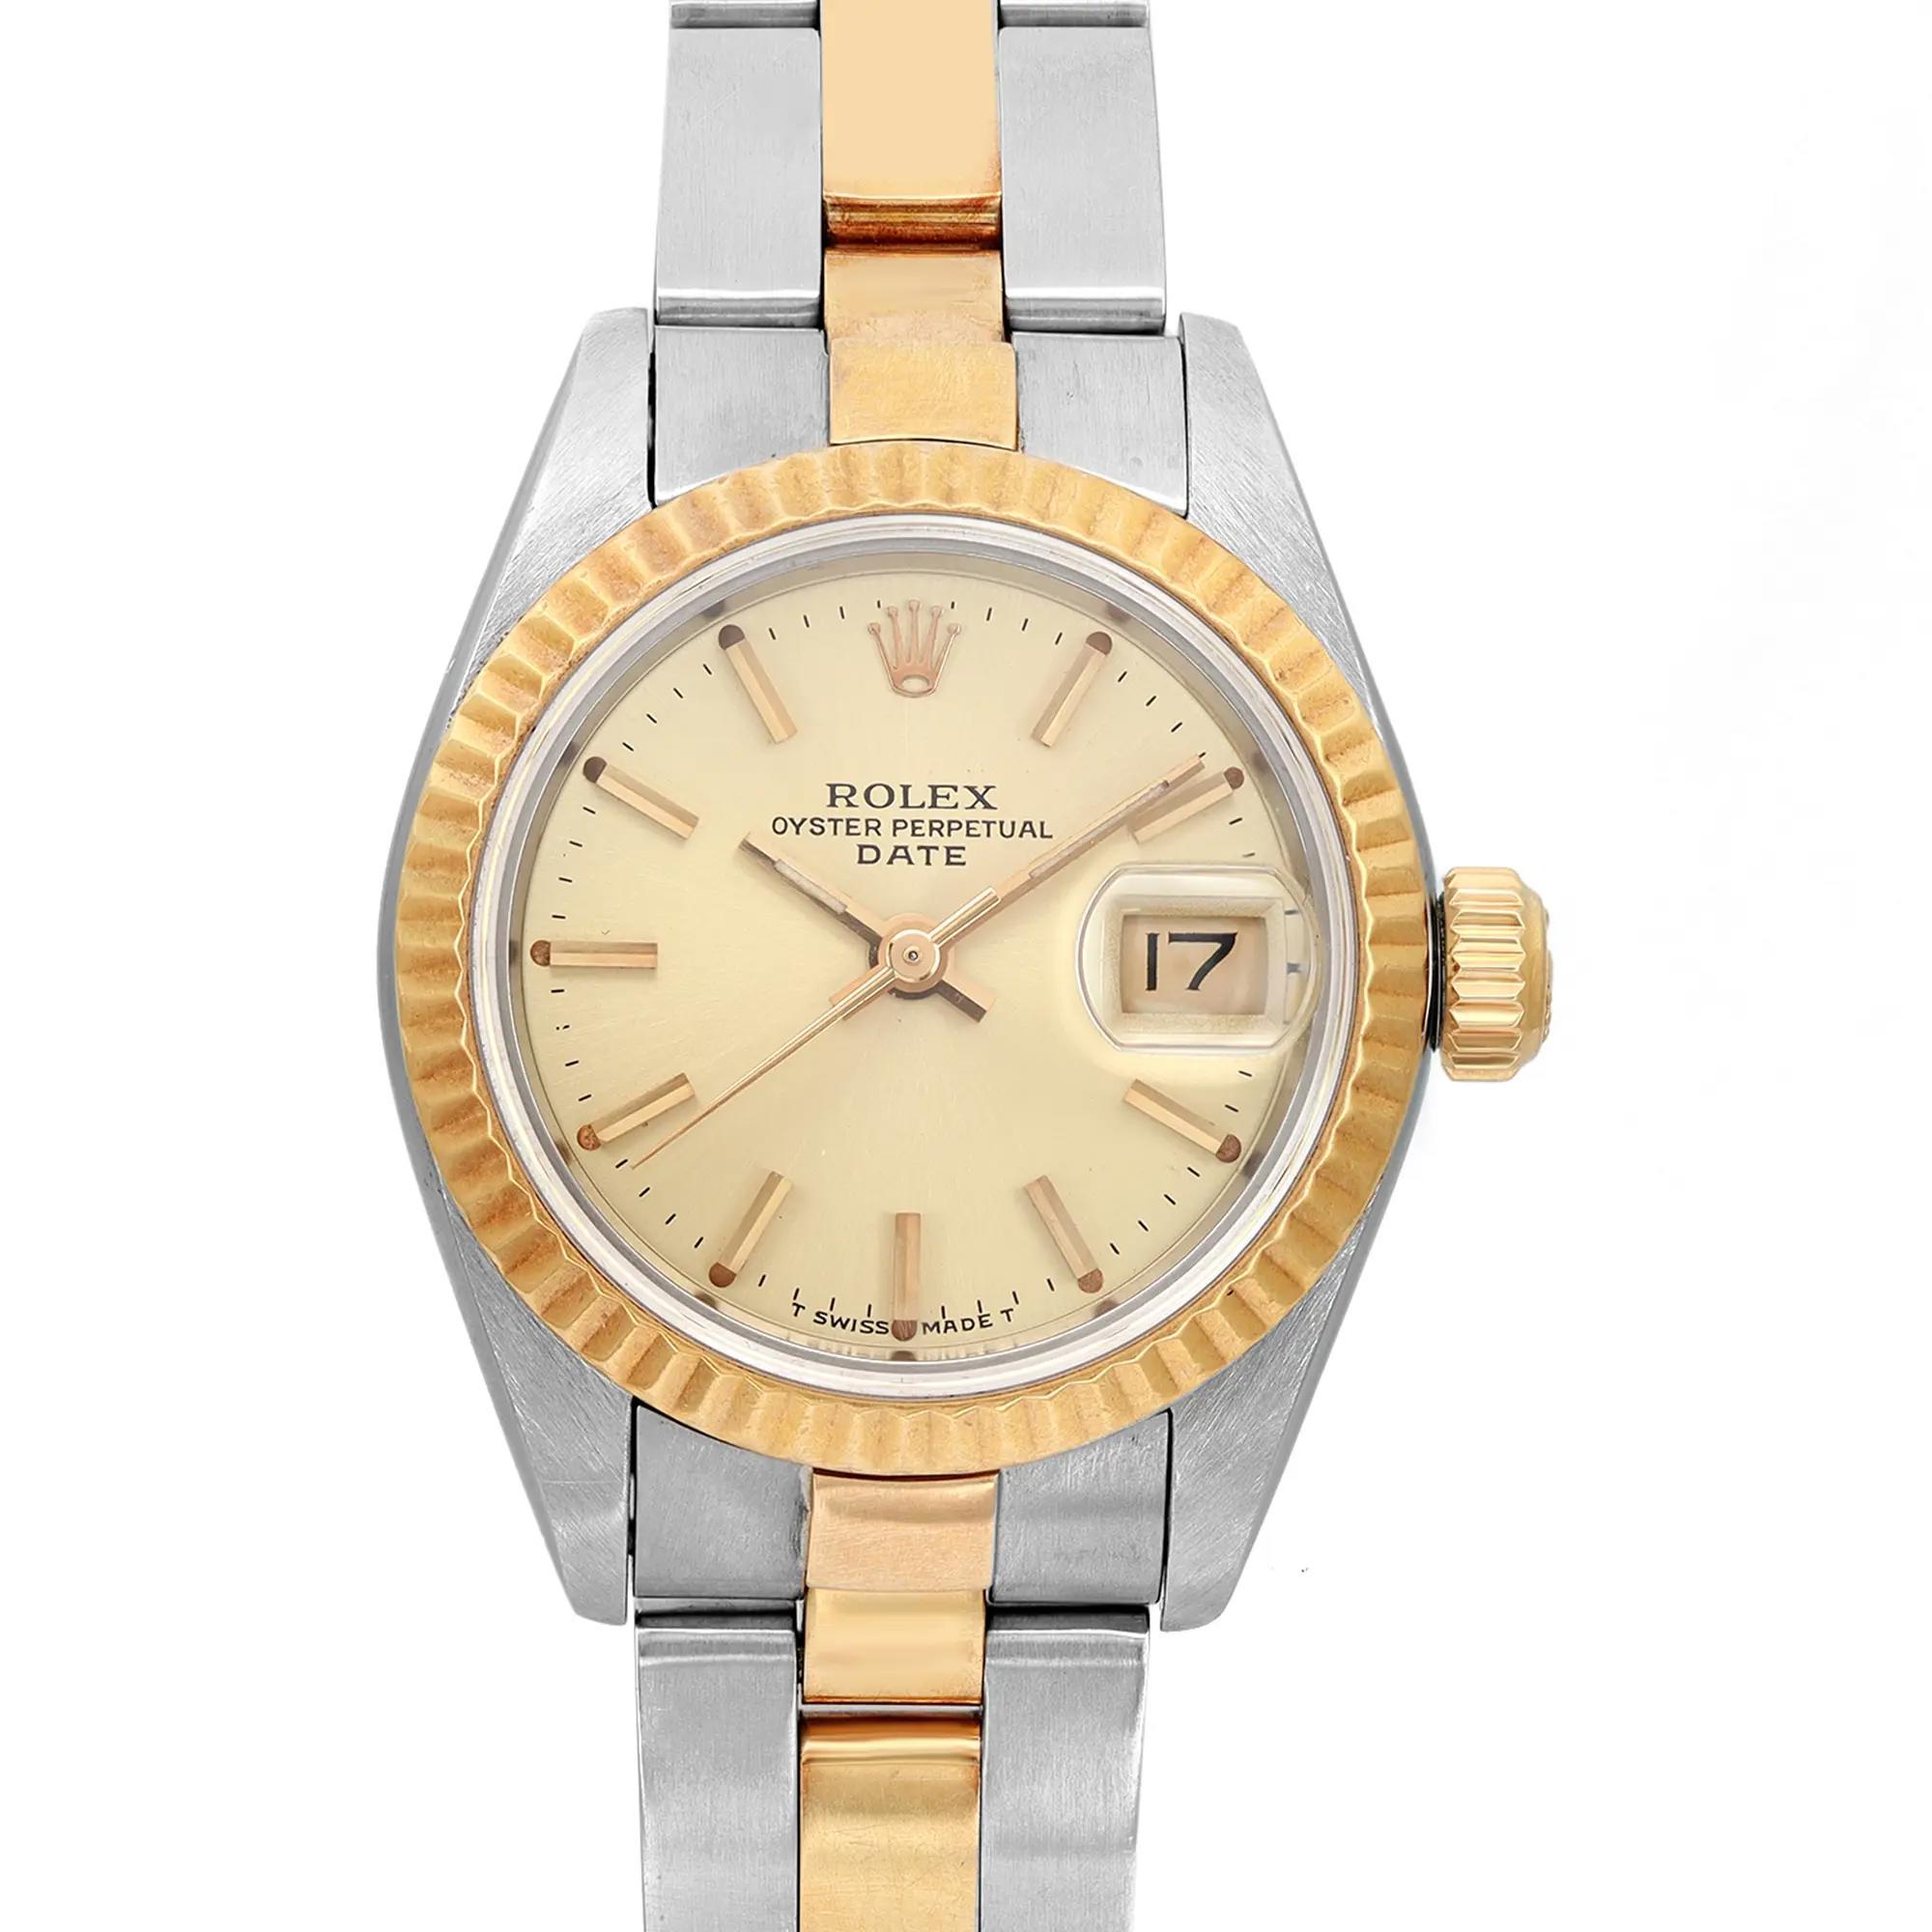 Pre-owned. Good condition. This watch was produced in 1985. No box and papers.

Brand and Model Information:
Brand: Rolex
Model: Rolex Datejust 69173
Model Number: 69173

Type and Style:
Type: Wristwatch
Style: Luxury
Department: Women
Display: